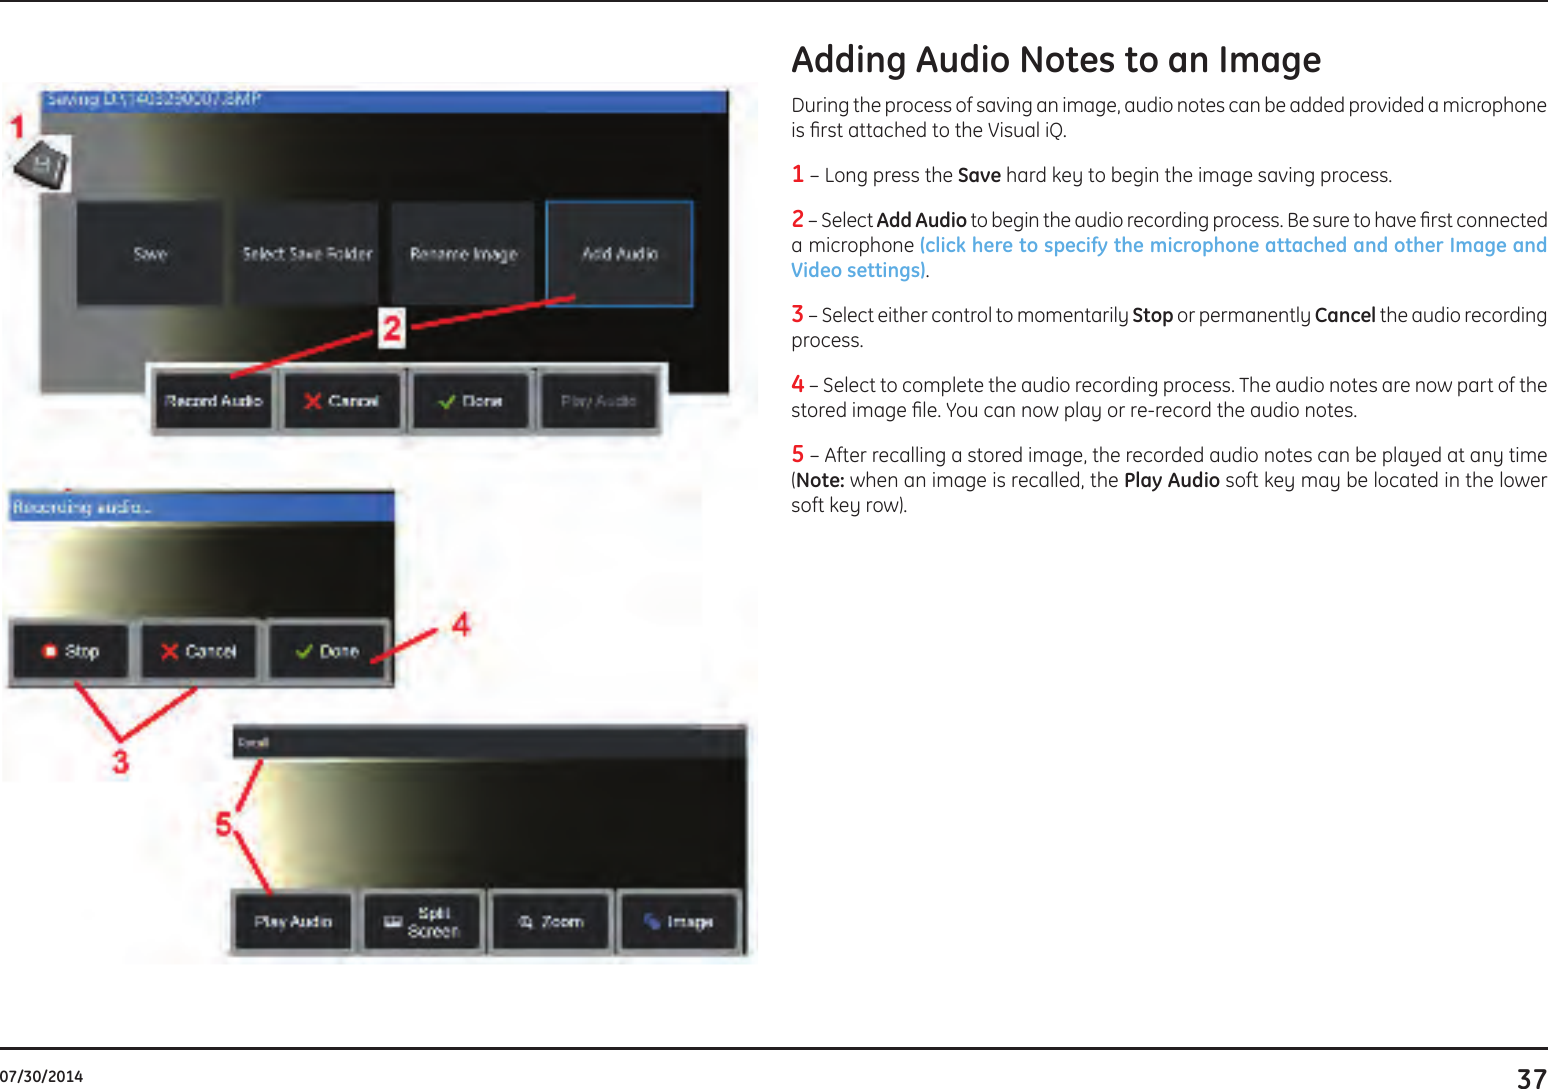 3707/30/2014Adding Audio Notes to an Image During the process of saving an image, audio notes can be added provided a microphone is rst attached to the Visual iQ.1 – Long press the Save hard key to begin the image saving process. 2 – Select Add Audio to begin the audio recording process. Be sure to have rst connected a microphone (click here to specify the microphone attached and other Image and Video settings). 3 – Select either control to momentarily Stop or permanently Cancel the audio recording process. 4 – Select to complete the audio recording process. The audio notes are now part of the stored image le. You can now play or re-record the audio notes.5 – After recalling a stored image, the recorded audio notes can be played at any time (Note: when an image is recalled, the Play Audio soft key may be located in the lower soft key row). 